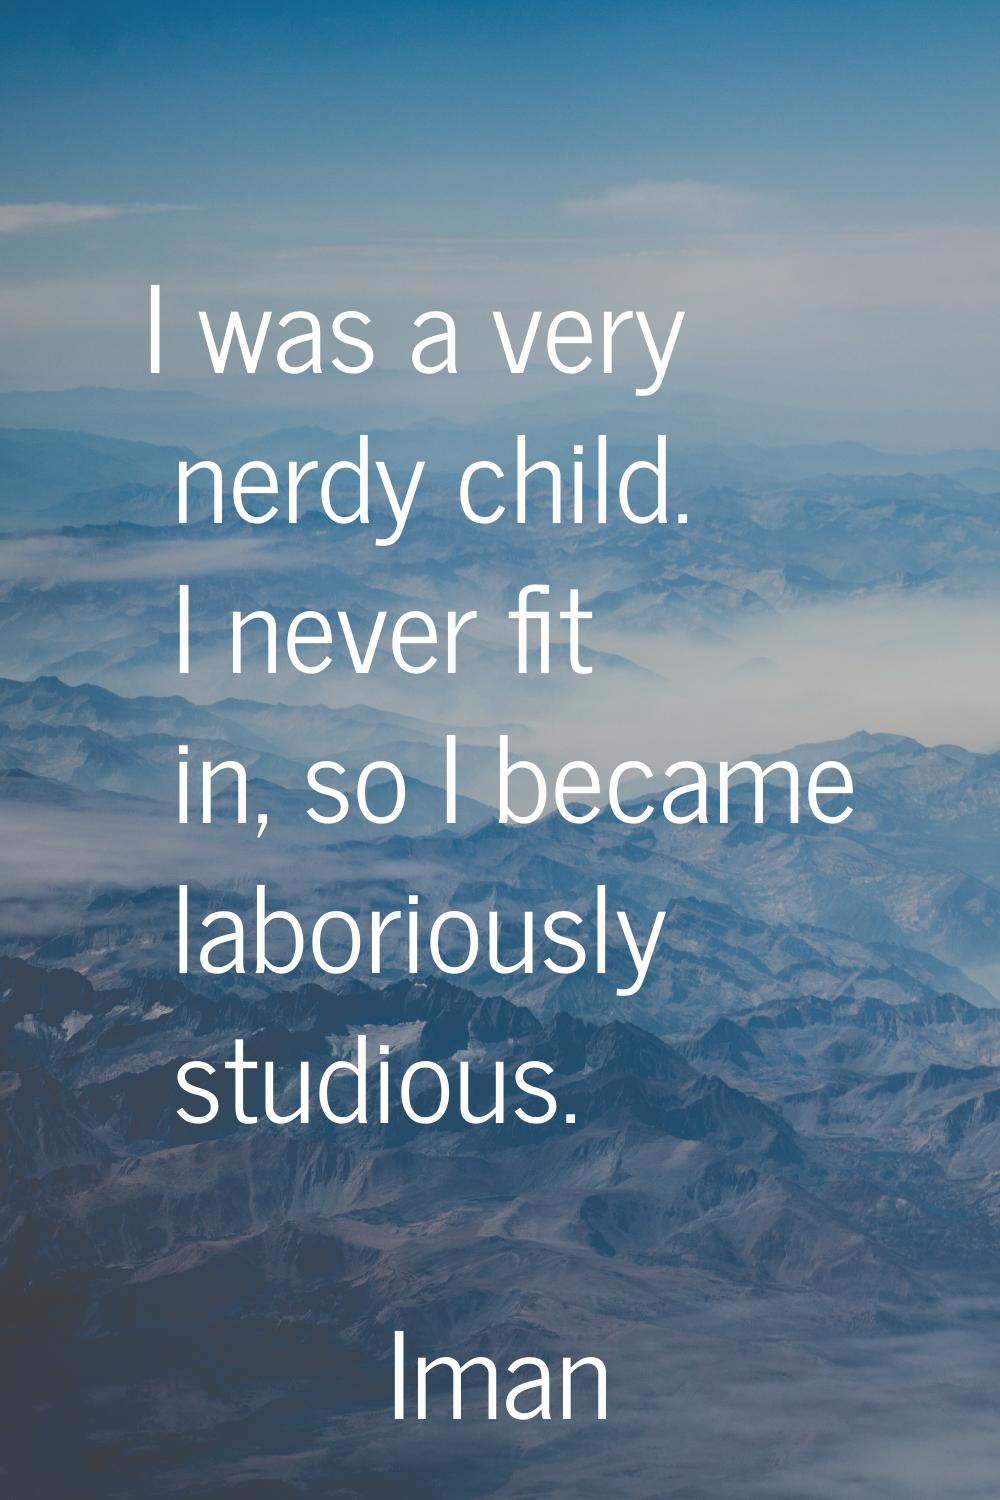 I was a very nerdy child. I never fit in, so I became laboriously studious.